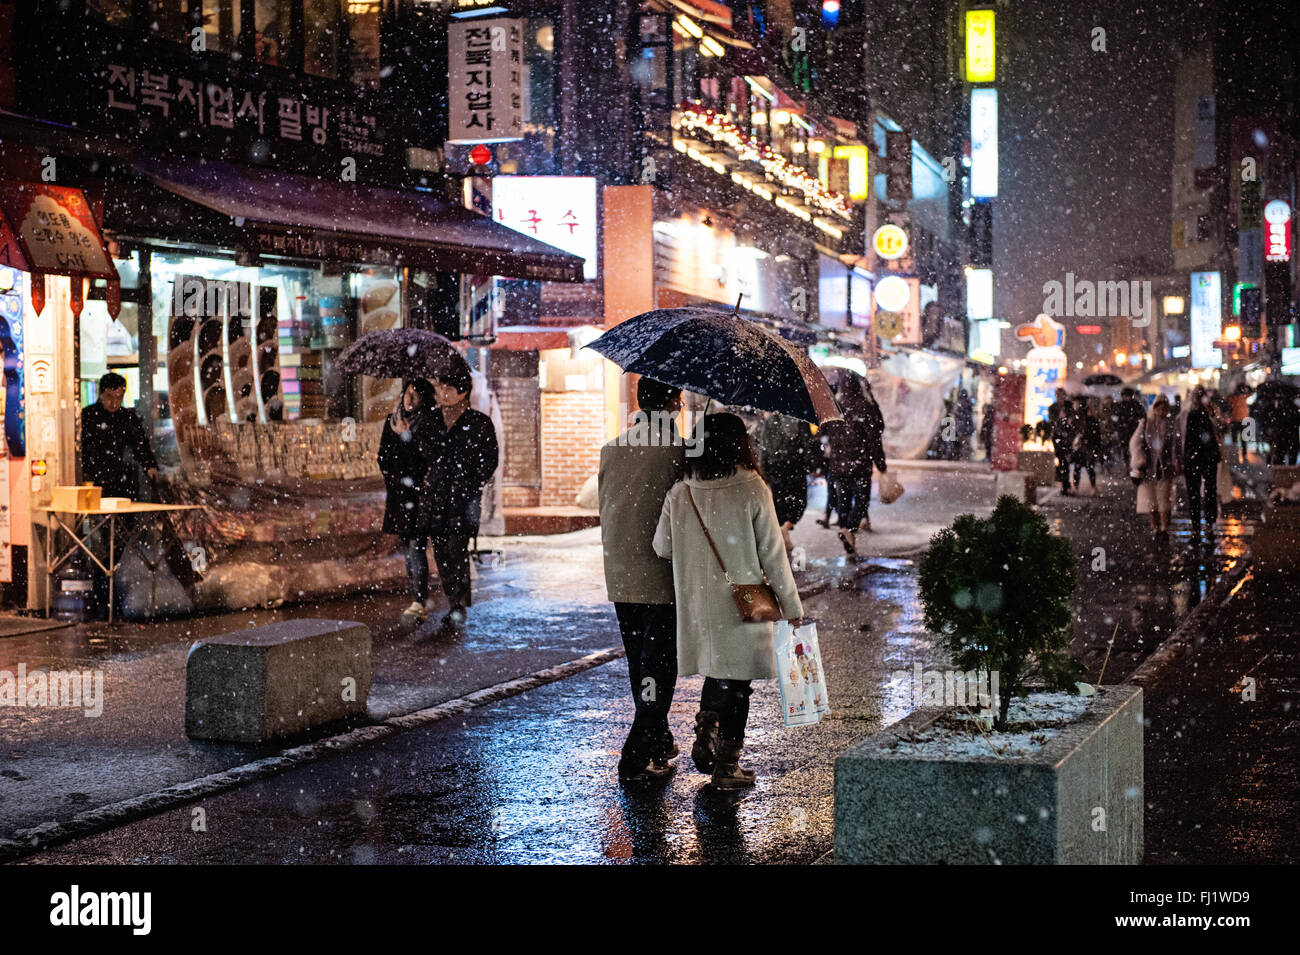 Couples strolling through Insadong, Seoul, on a snowy evening. Stock Photo